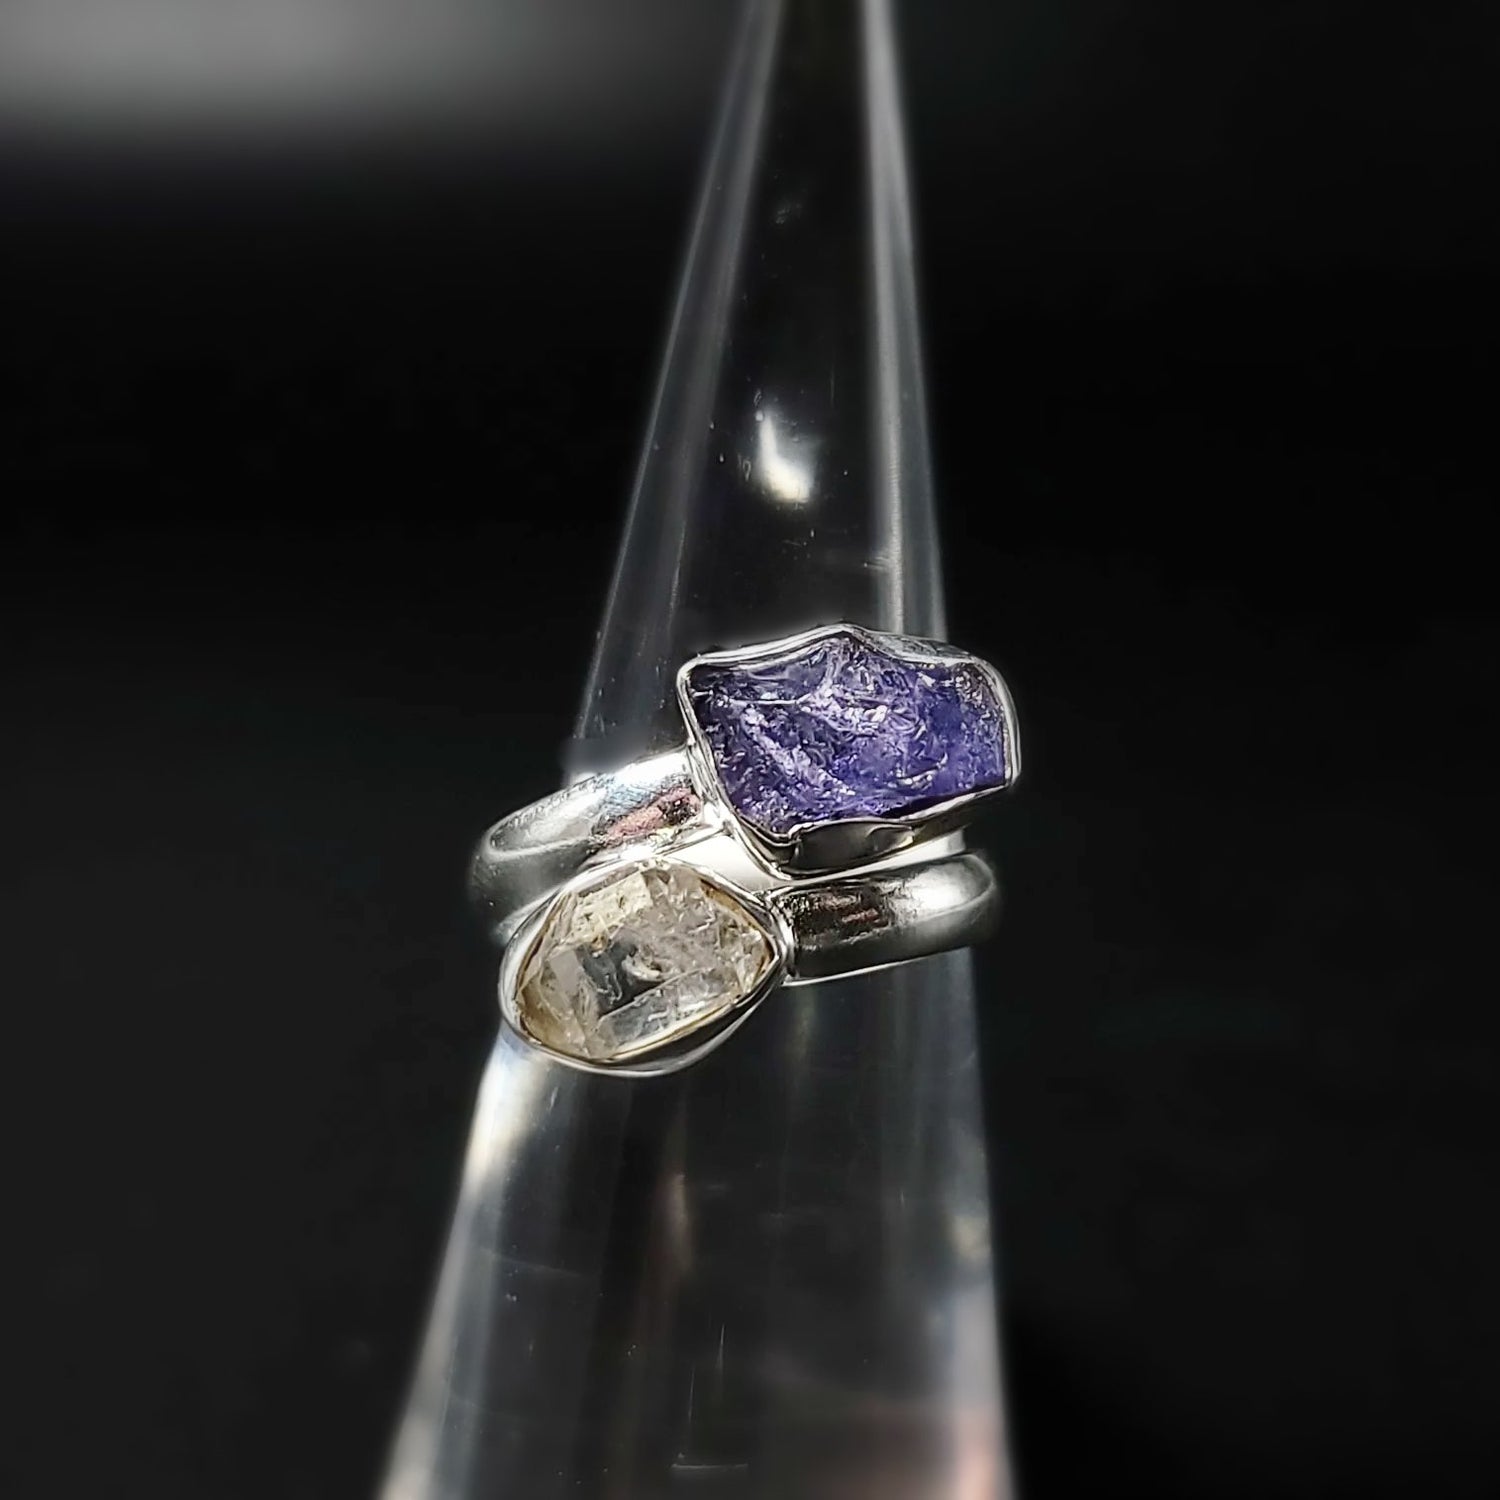 Herkimer Diamond & Tanzanite Ring Sterling Silver - Elevated Metaphysical